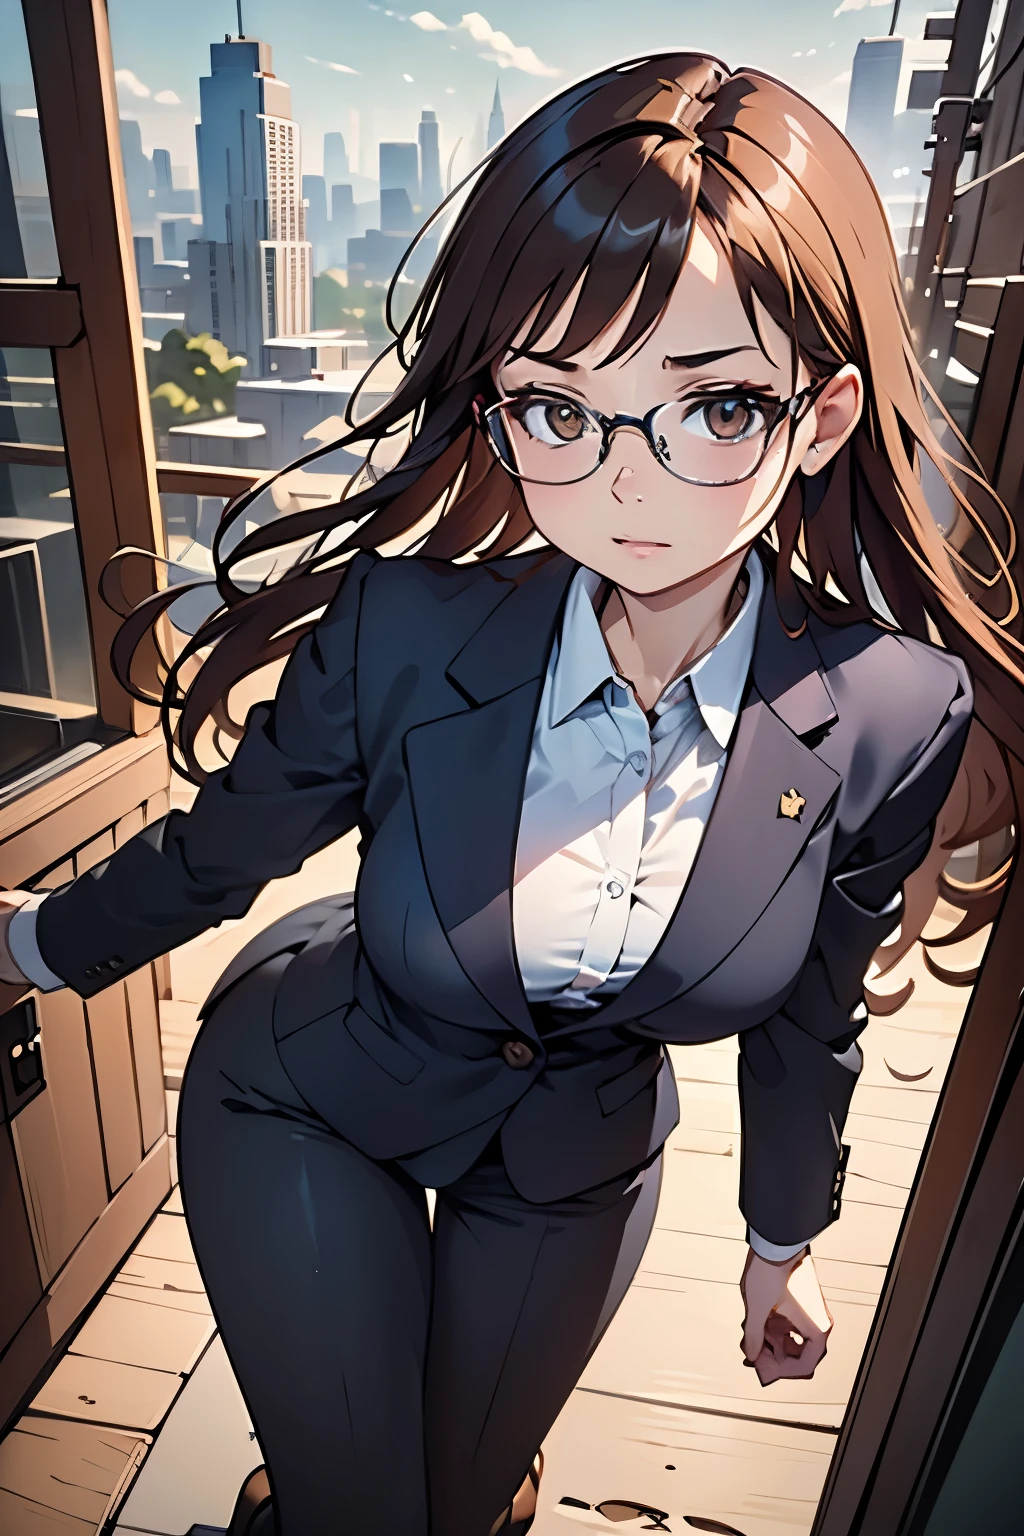 (disorganized, High resolution, Super detailed, realistic, ), 1 girl,mature, alone, long brown hair 、((business suit)),brown eyes,  (Glasseodern city background, Super detailedな, highest quality, Detail view, vectorized, 8K,  graphic design, vector lines, Full HD，whole body